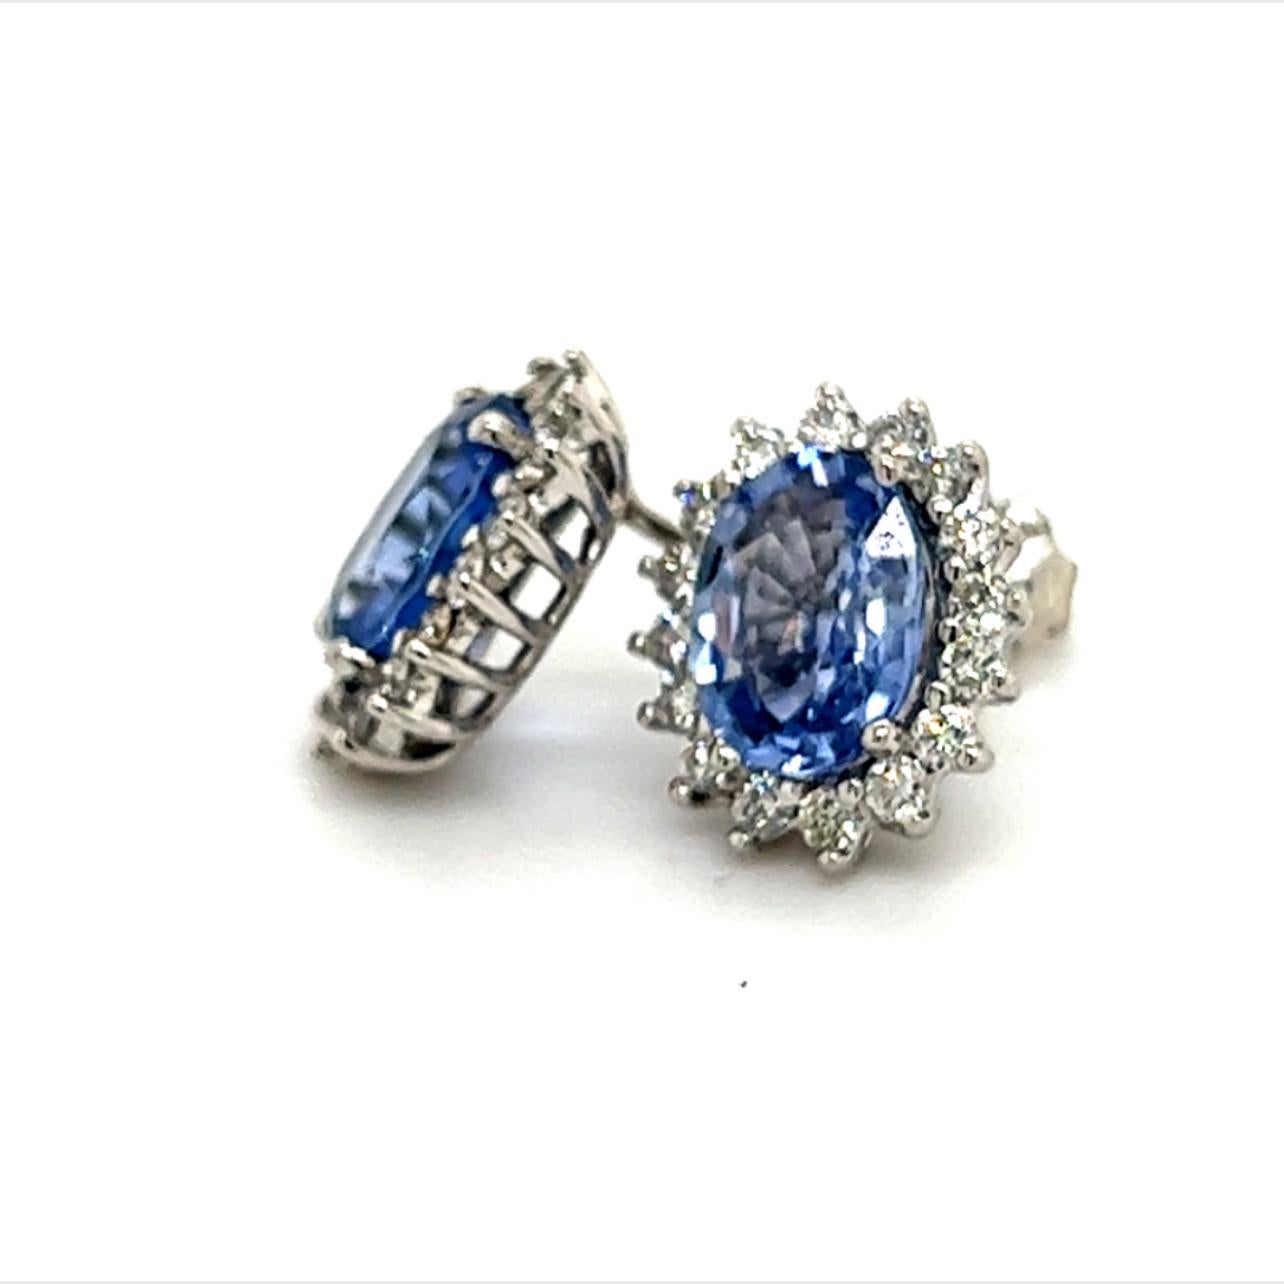 Natural Sapphire Diamond Earrings 14k Gold 3.2 TCW Certified For Sale 2